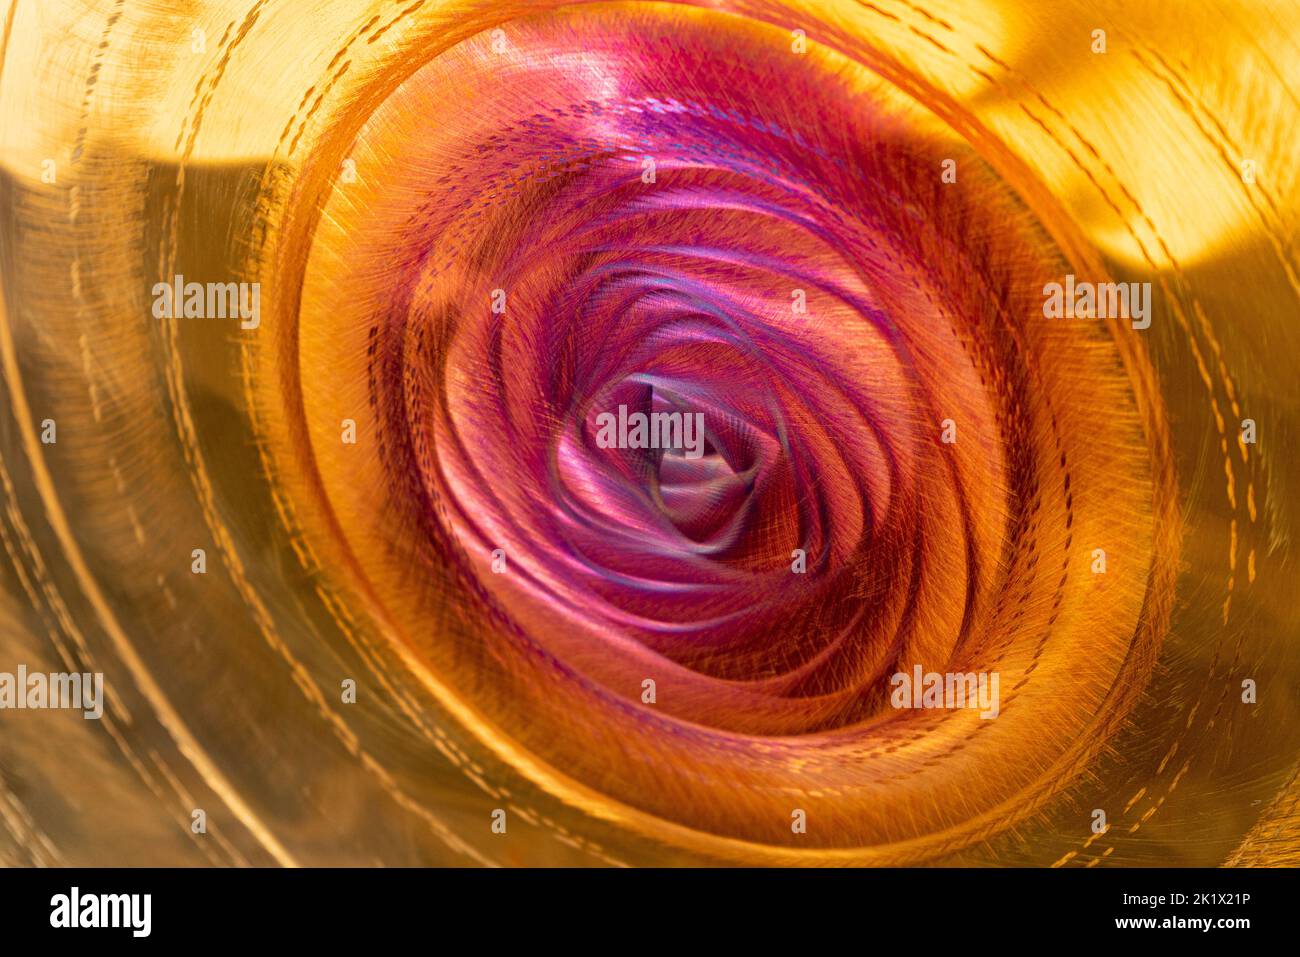 Full frame abstract detail shot of a colorful metallic gong Stock Photo